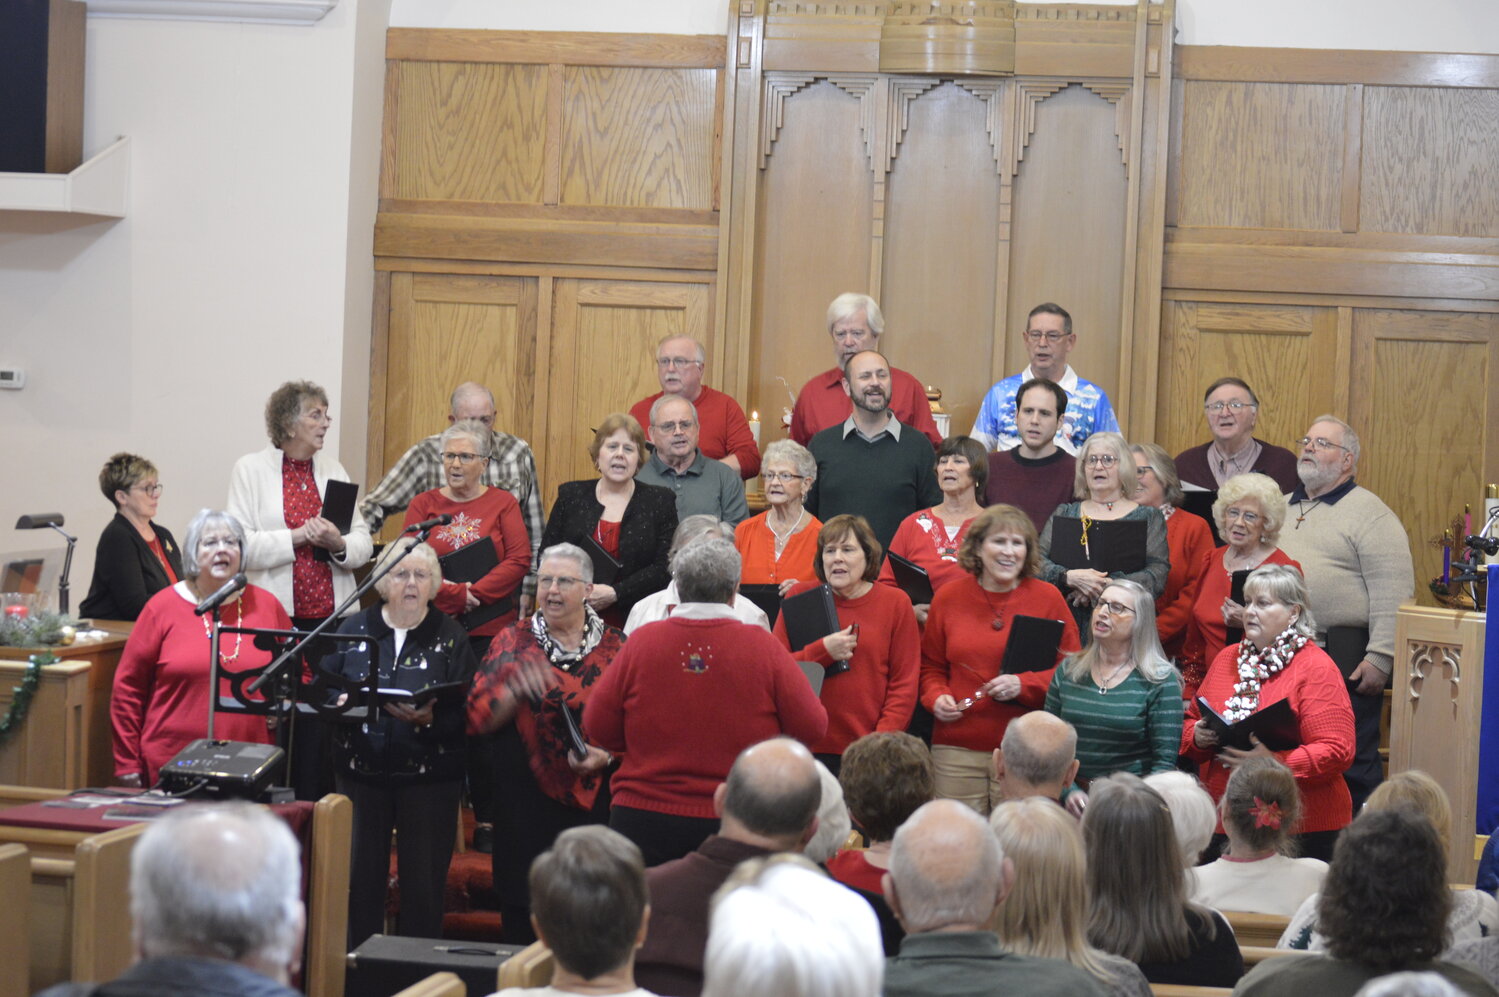 The cantata choir comprised of members from various churches in Montgomery County performed Sunday at 
Christ’s United Methodist Church.